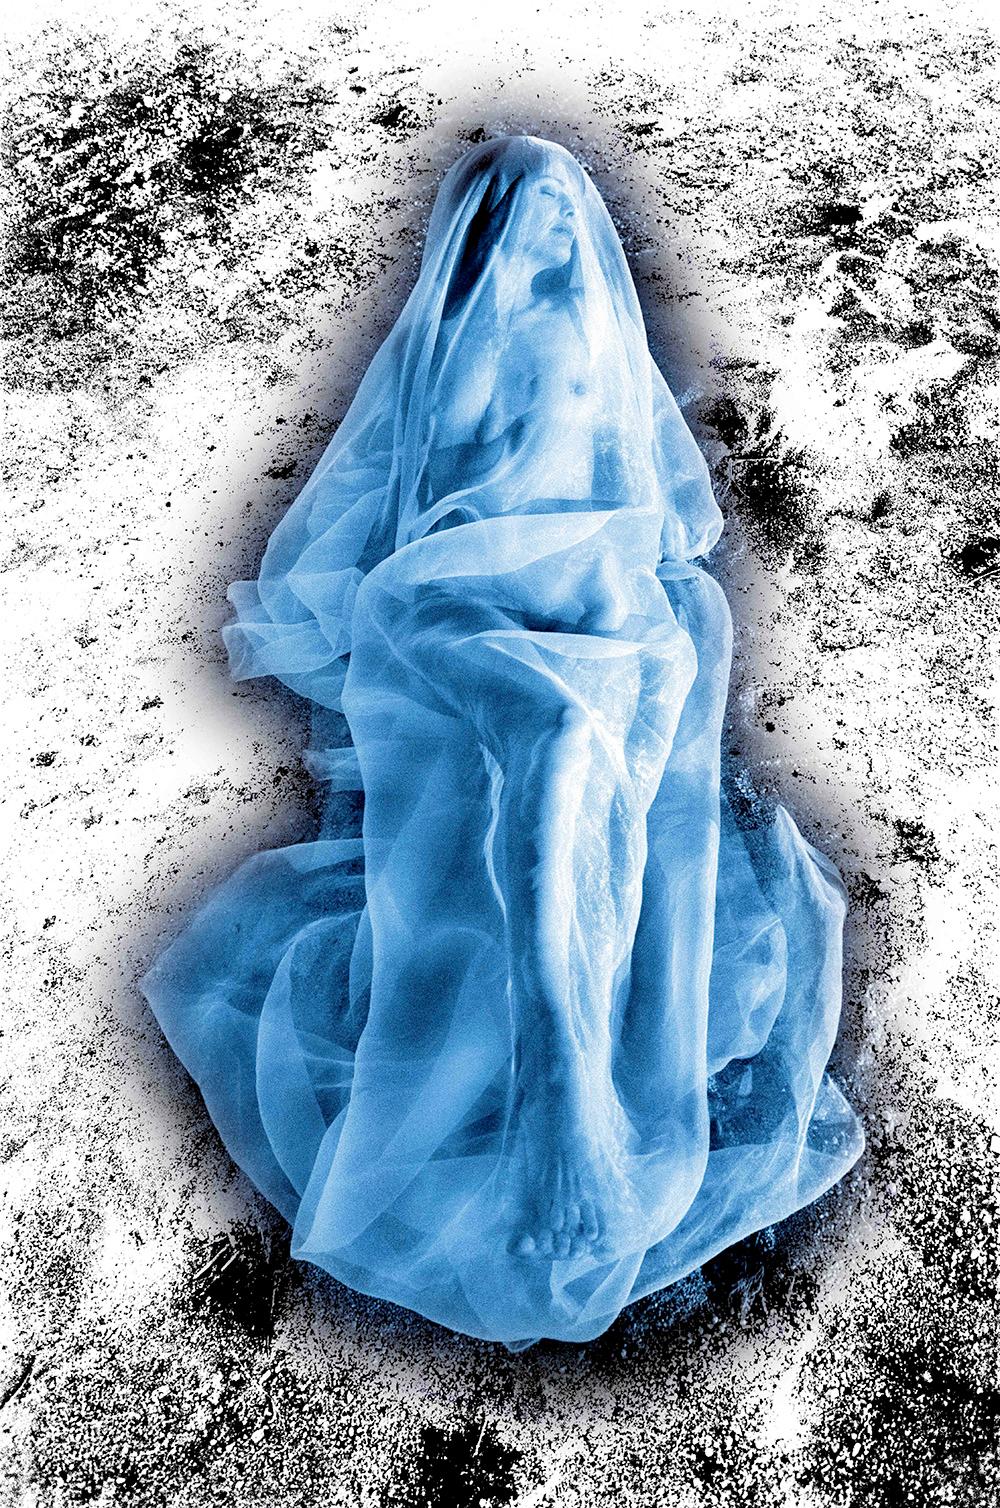 "Wrapped Series Untitled #10" Fine art photography 1/10 by Robert Mack  
2014
Photograph, archival exhibition paper 
Aluminum mount, UV mat protection
42” x 28” inches 
107 x 72 cm
Edition 1 of 10 + 2AP


Visual artist, Robert Mack, exhibits his